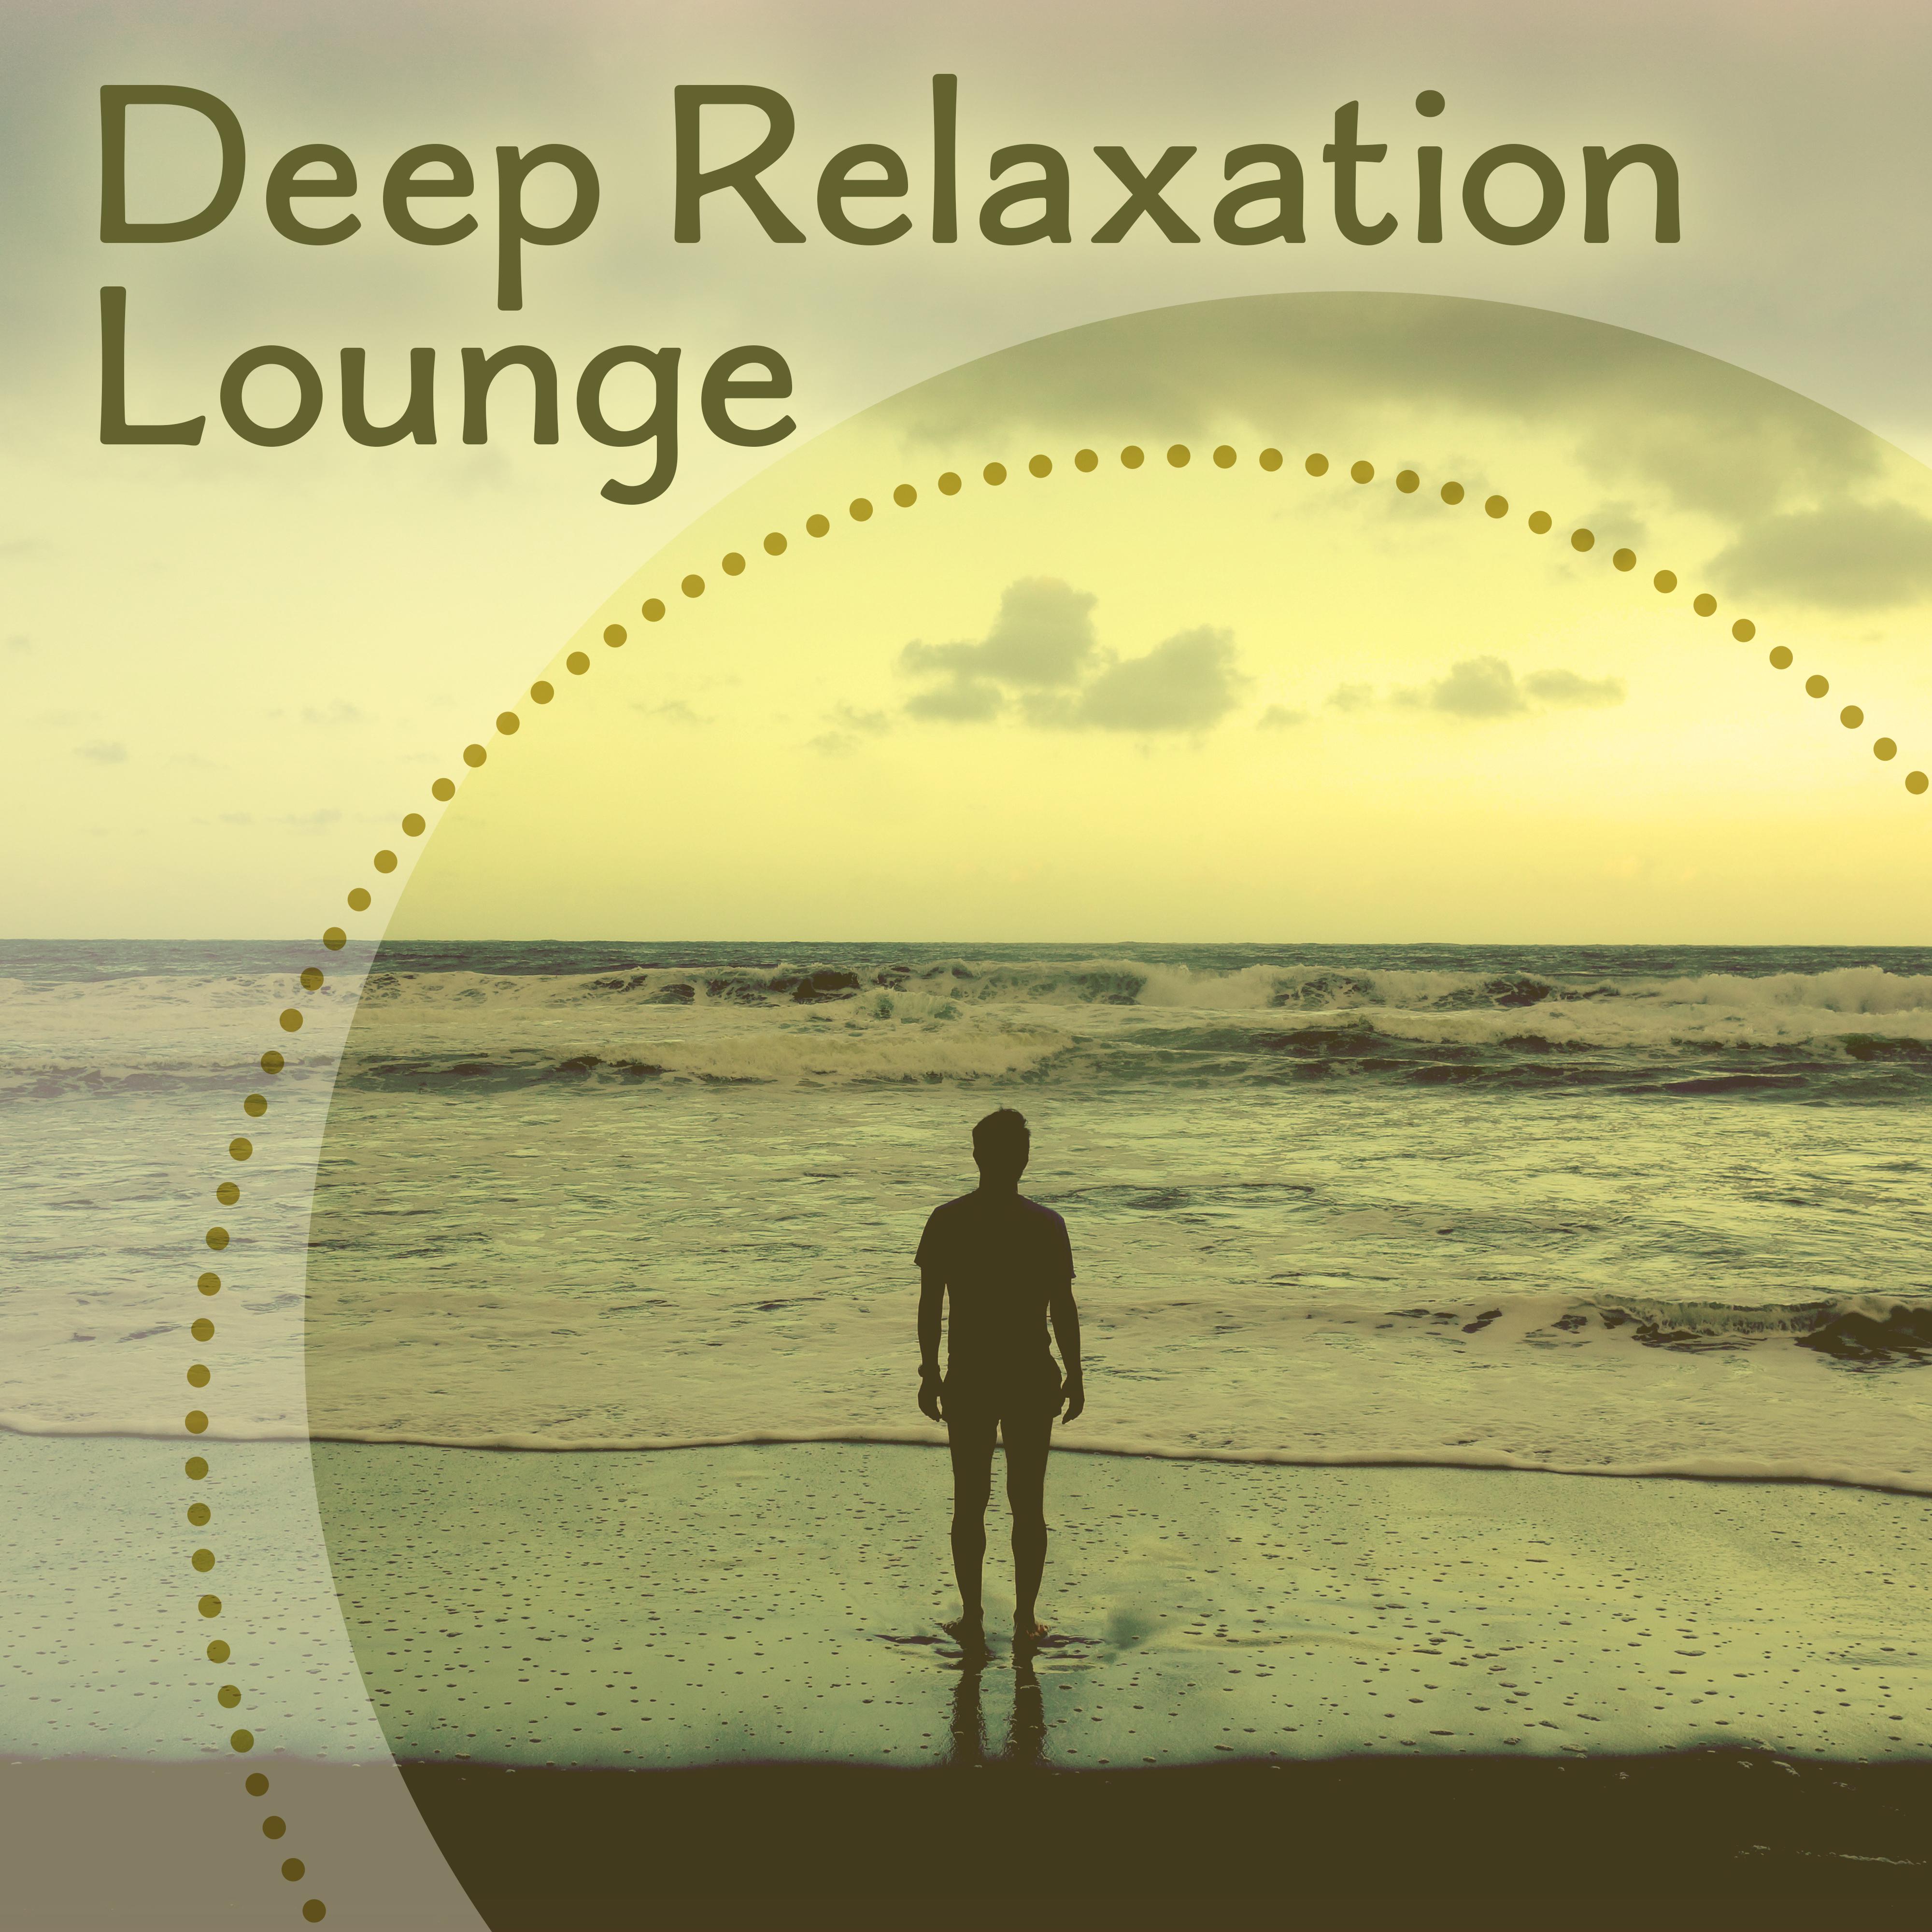 Deep Relaxation Lounge – Calming Sounds of Nature, Pure Relaxation, Natural Sounds, Relaxing Music